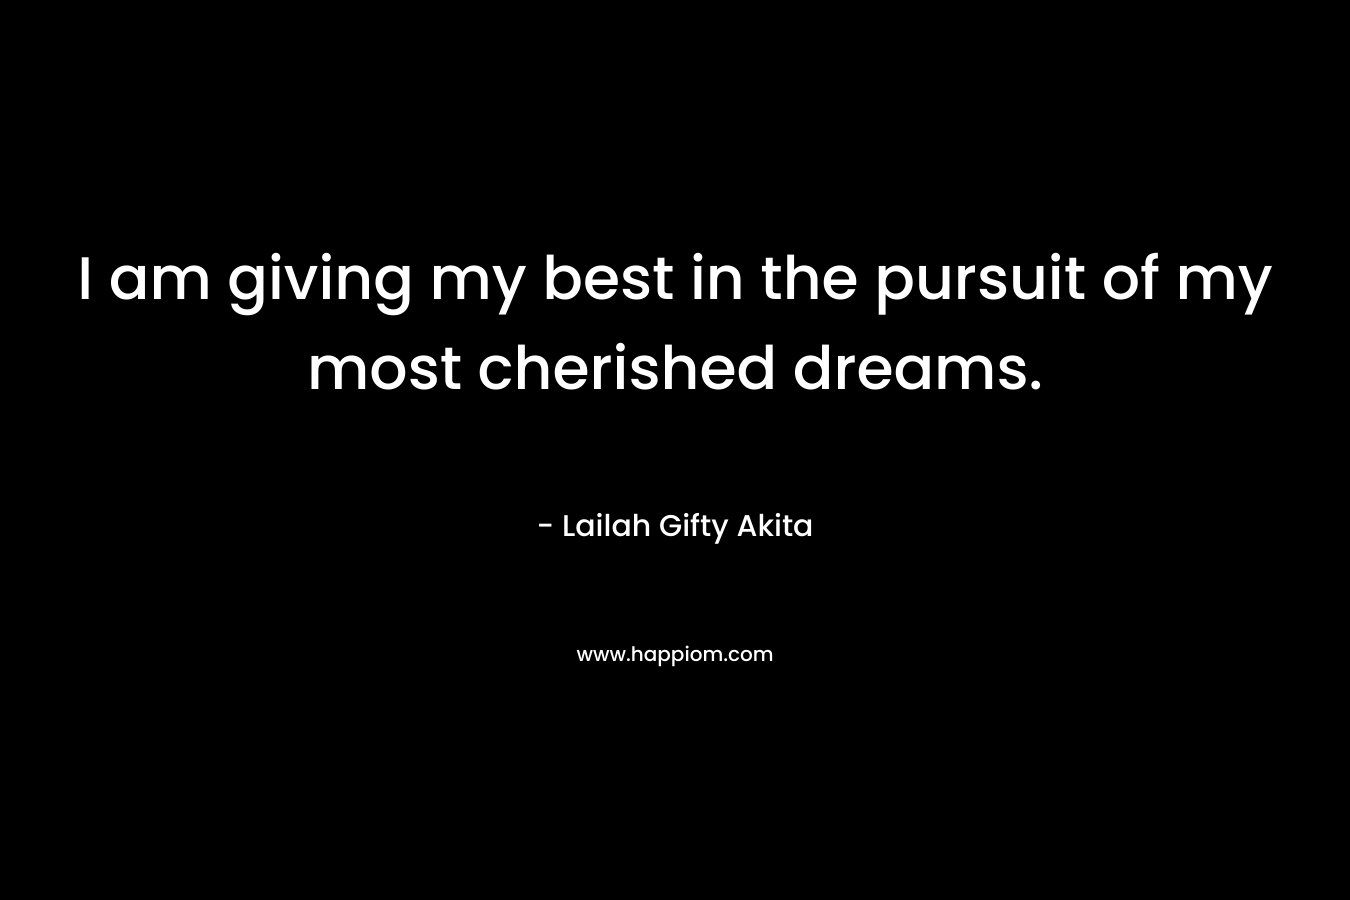 I am giving my best in the pursuit of my most cherished dreams. – Lailah Gifty Akita